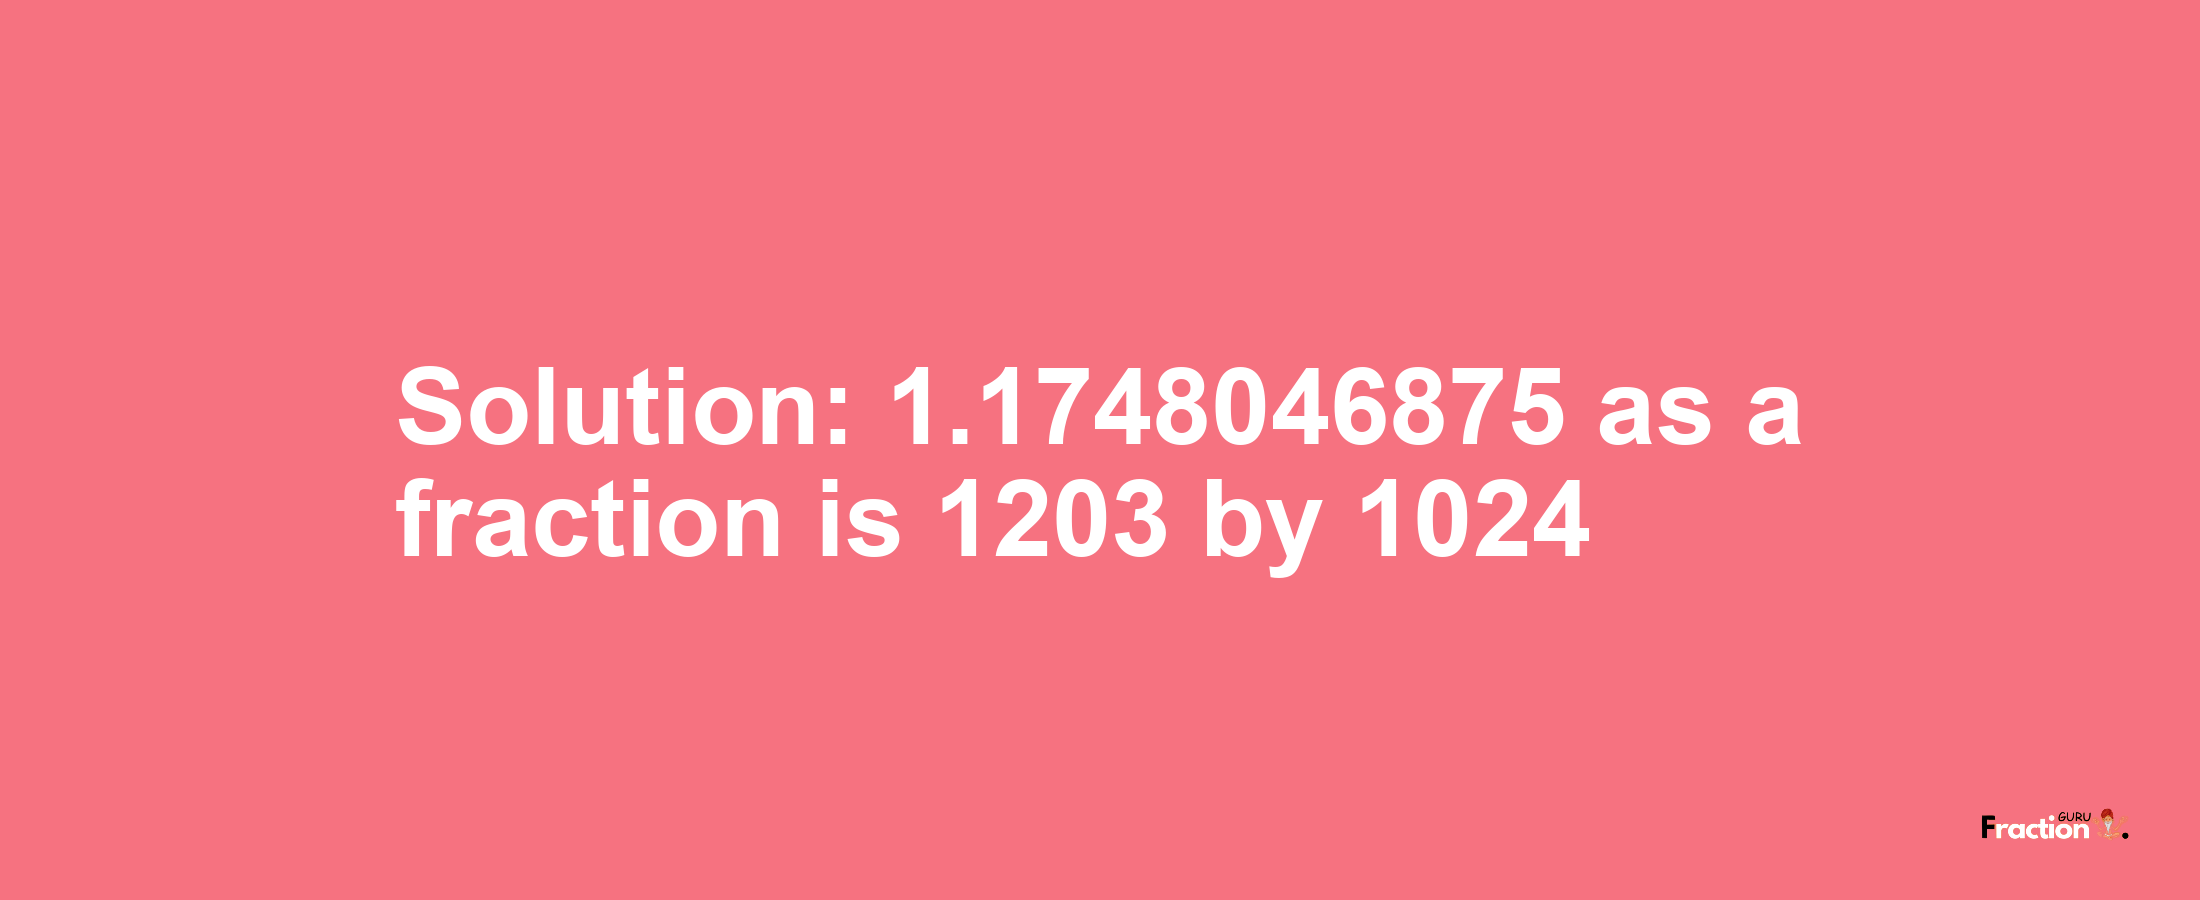 Solution:1.1748046875 as a fraction is 1203/1024